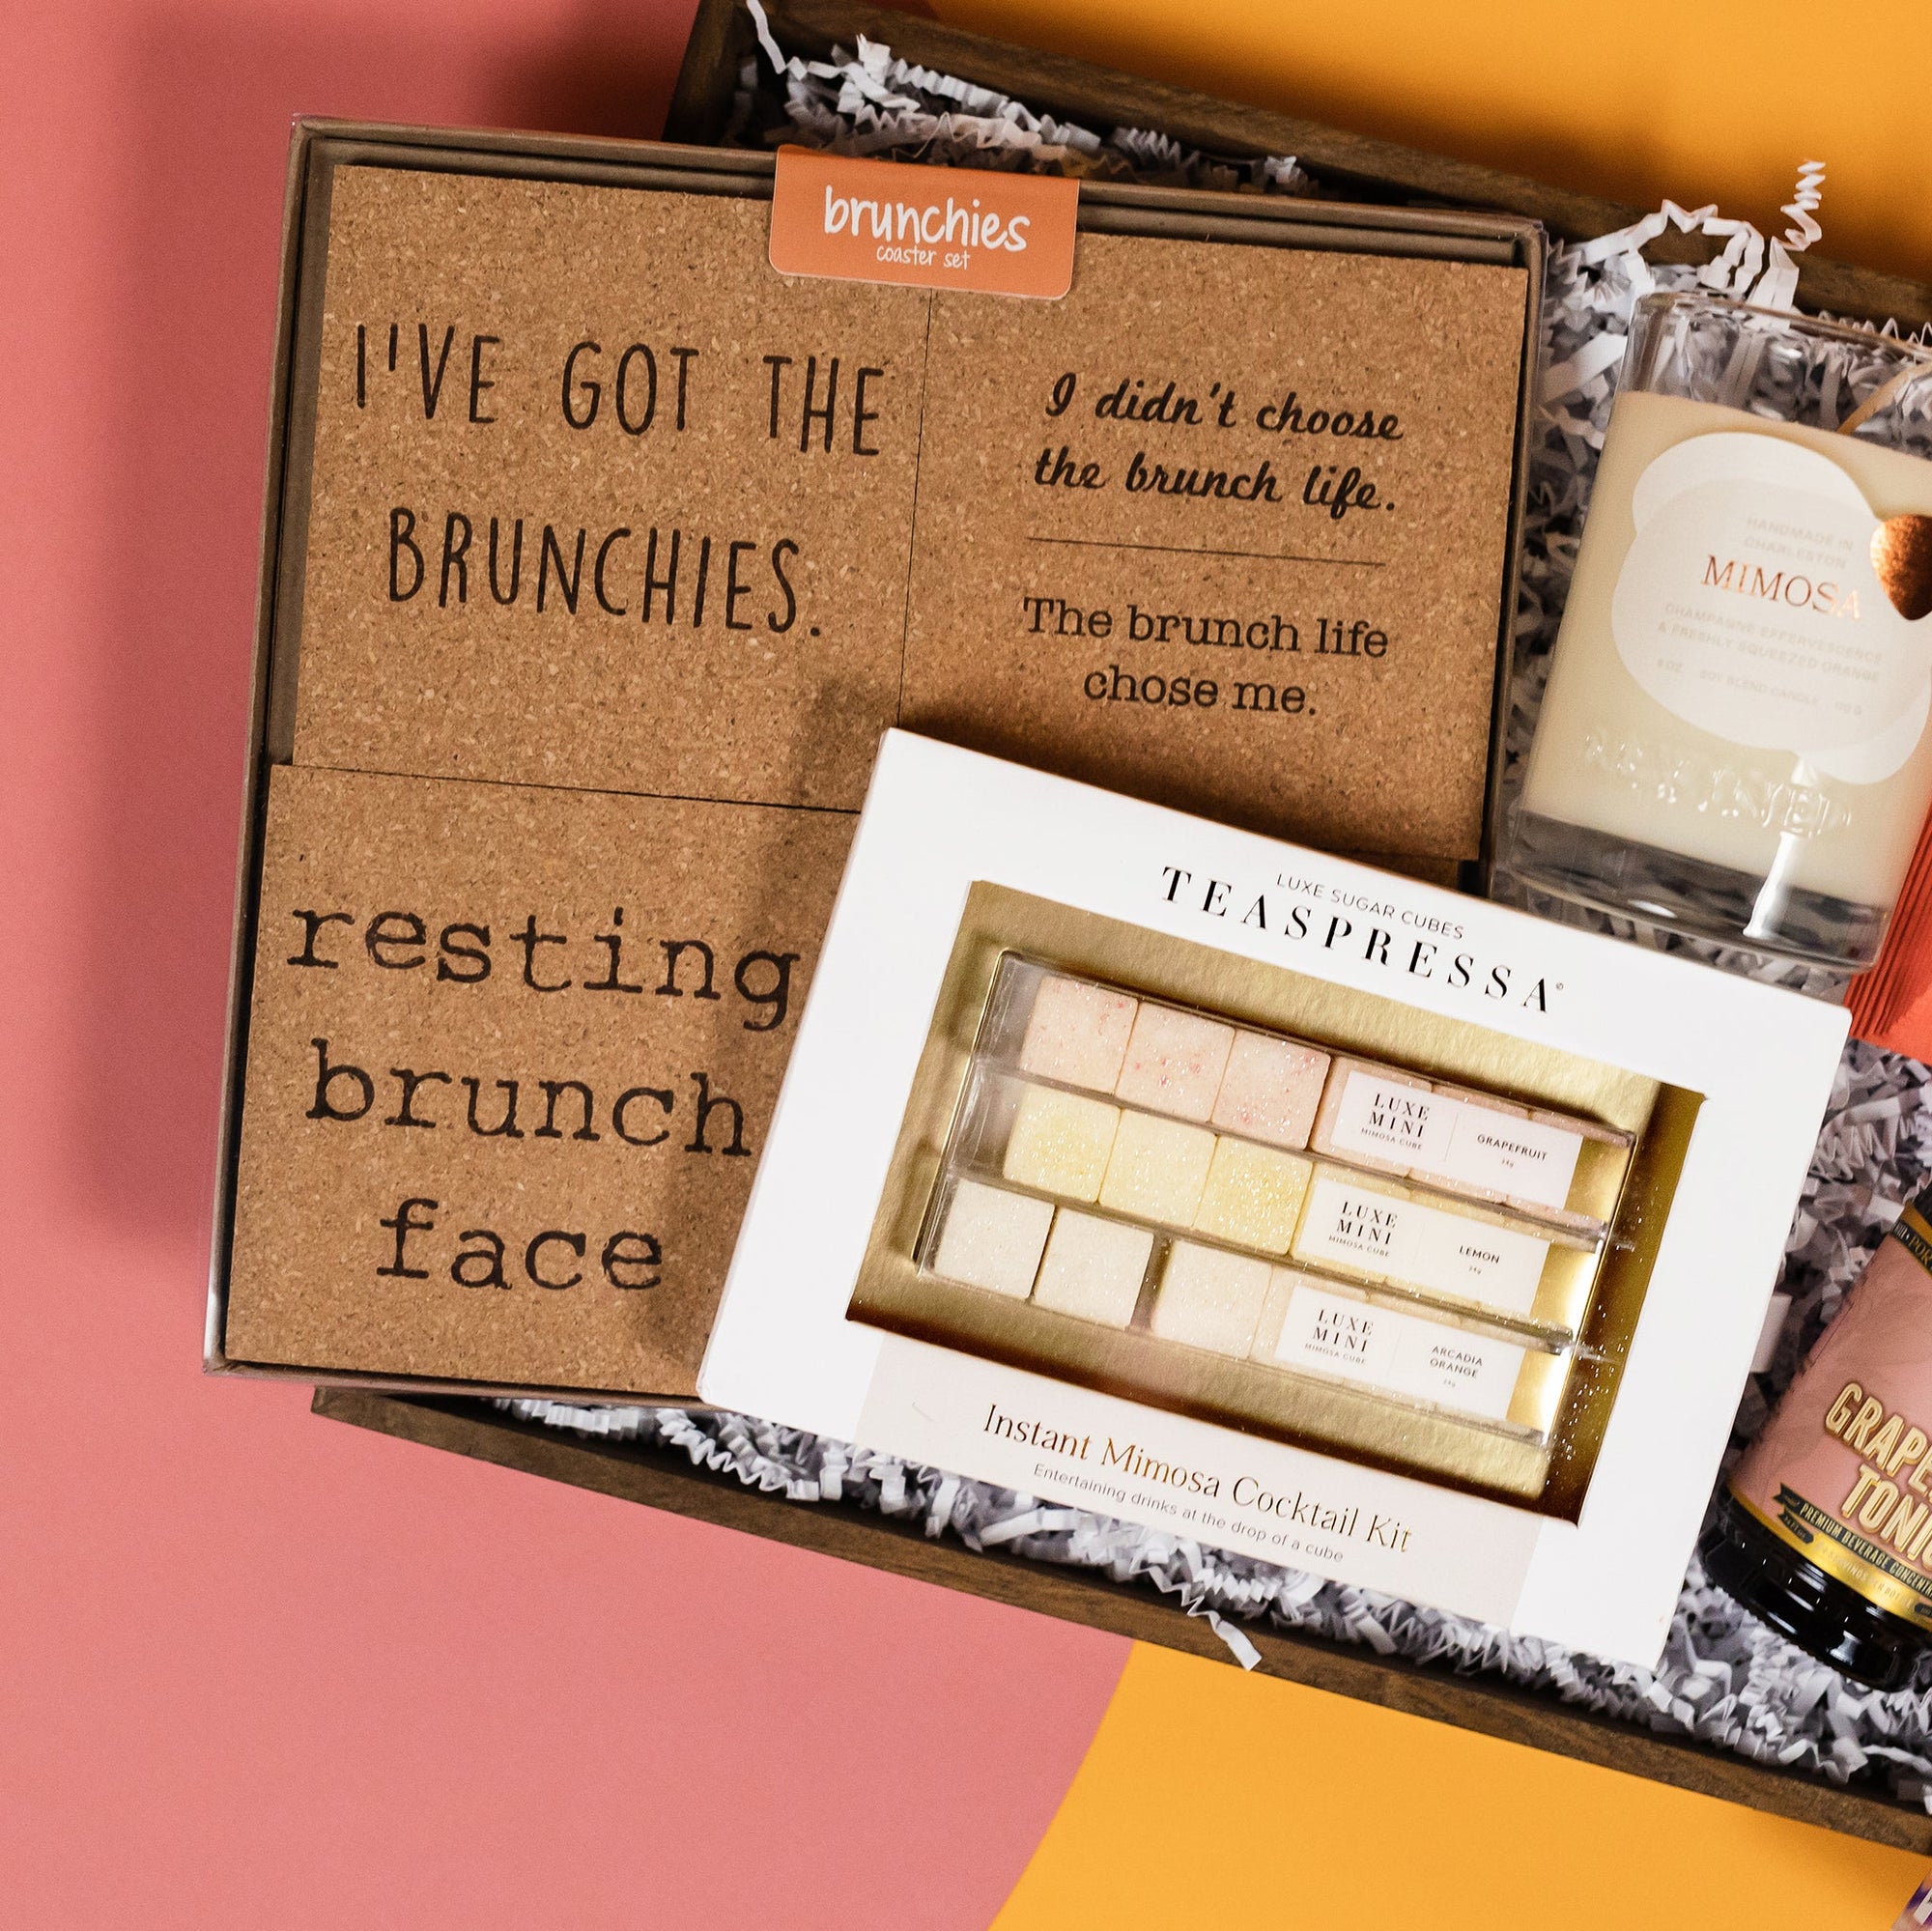 On a funky light orange and coral background sits a wooden tray filled to the brim with brunch accoutrements. This photo is a close-up of our favorite Teaspressa Instant Mimosa Cocktail Kit.